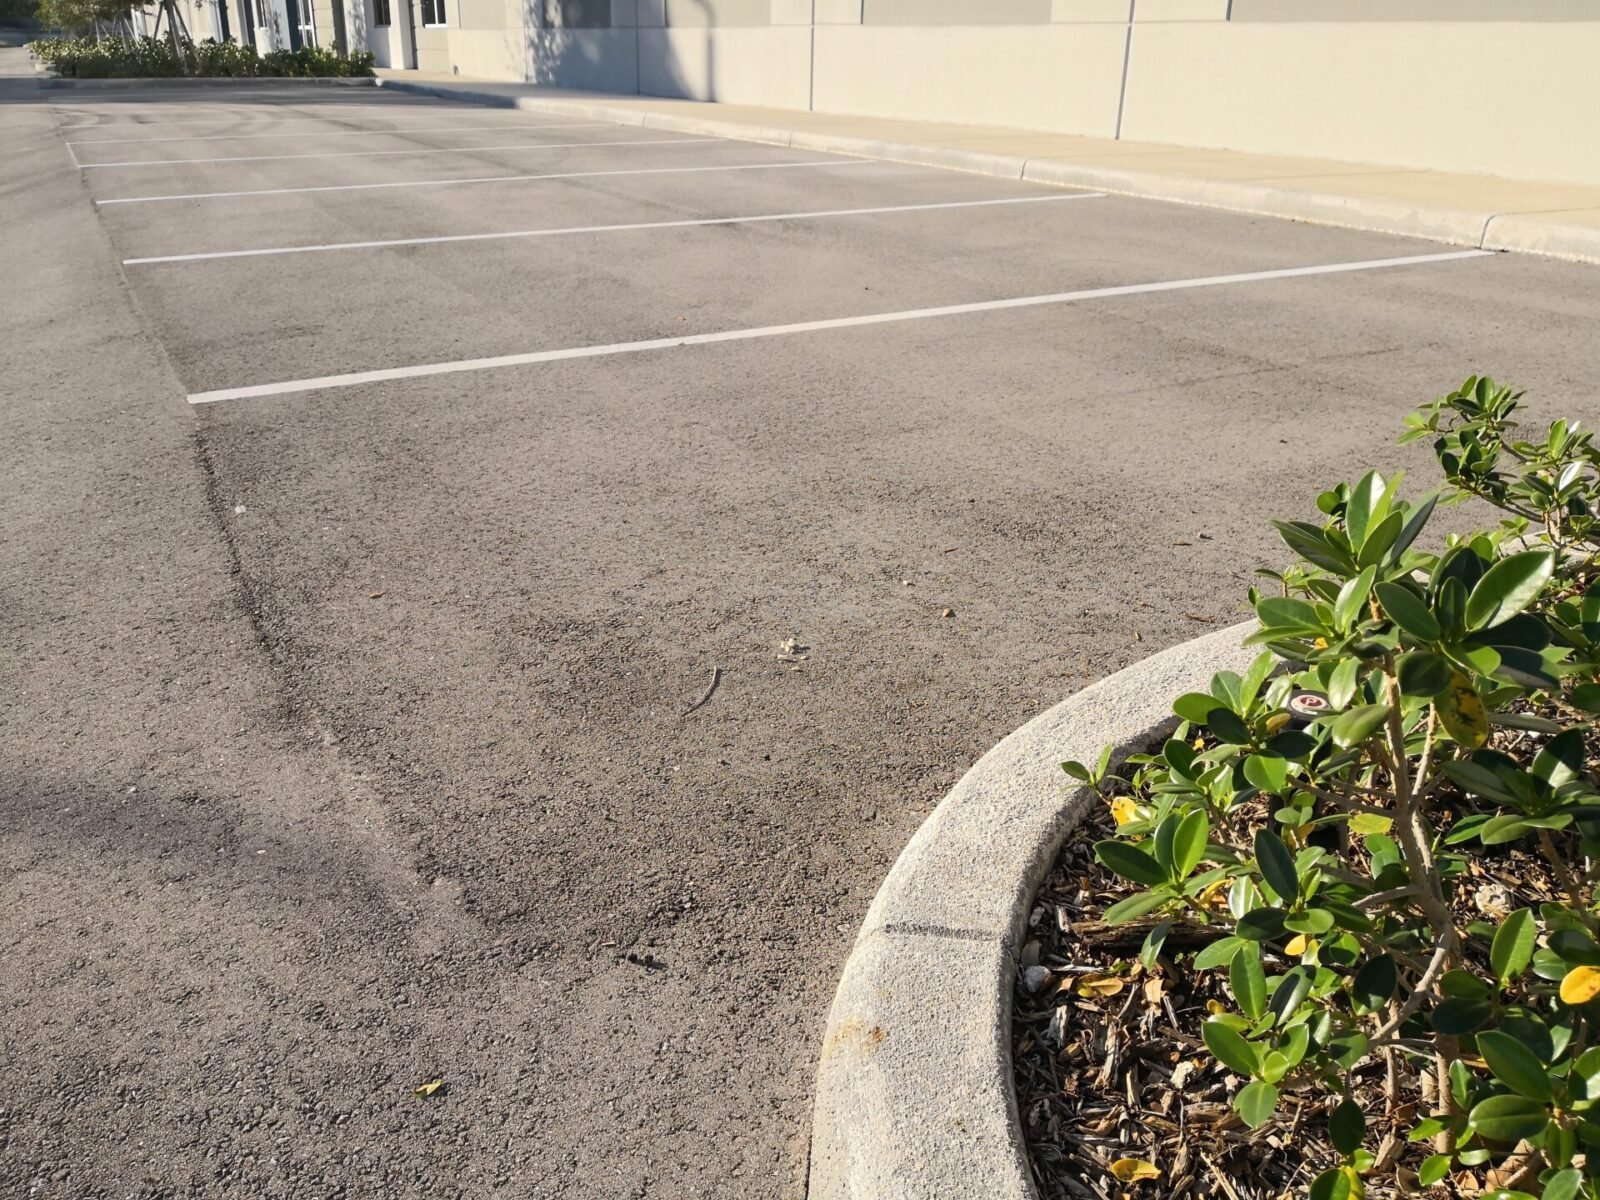 An empty parking lot in Boynton Beach, FL, with white lines marking individual spaces. The asphalt lot is bordered by a concrete curb on the right side, enclosing a small landscaped area with green shrubbery. A light-colored building stands in the background. Contact us for asphalt paving services and get a free quote!